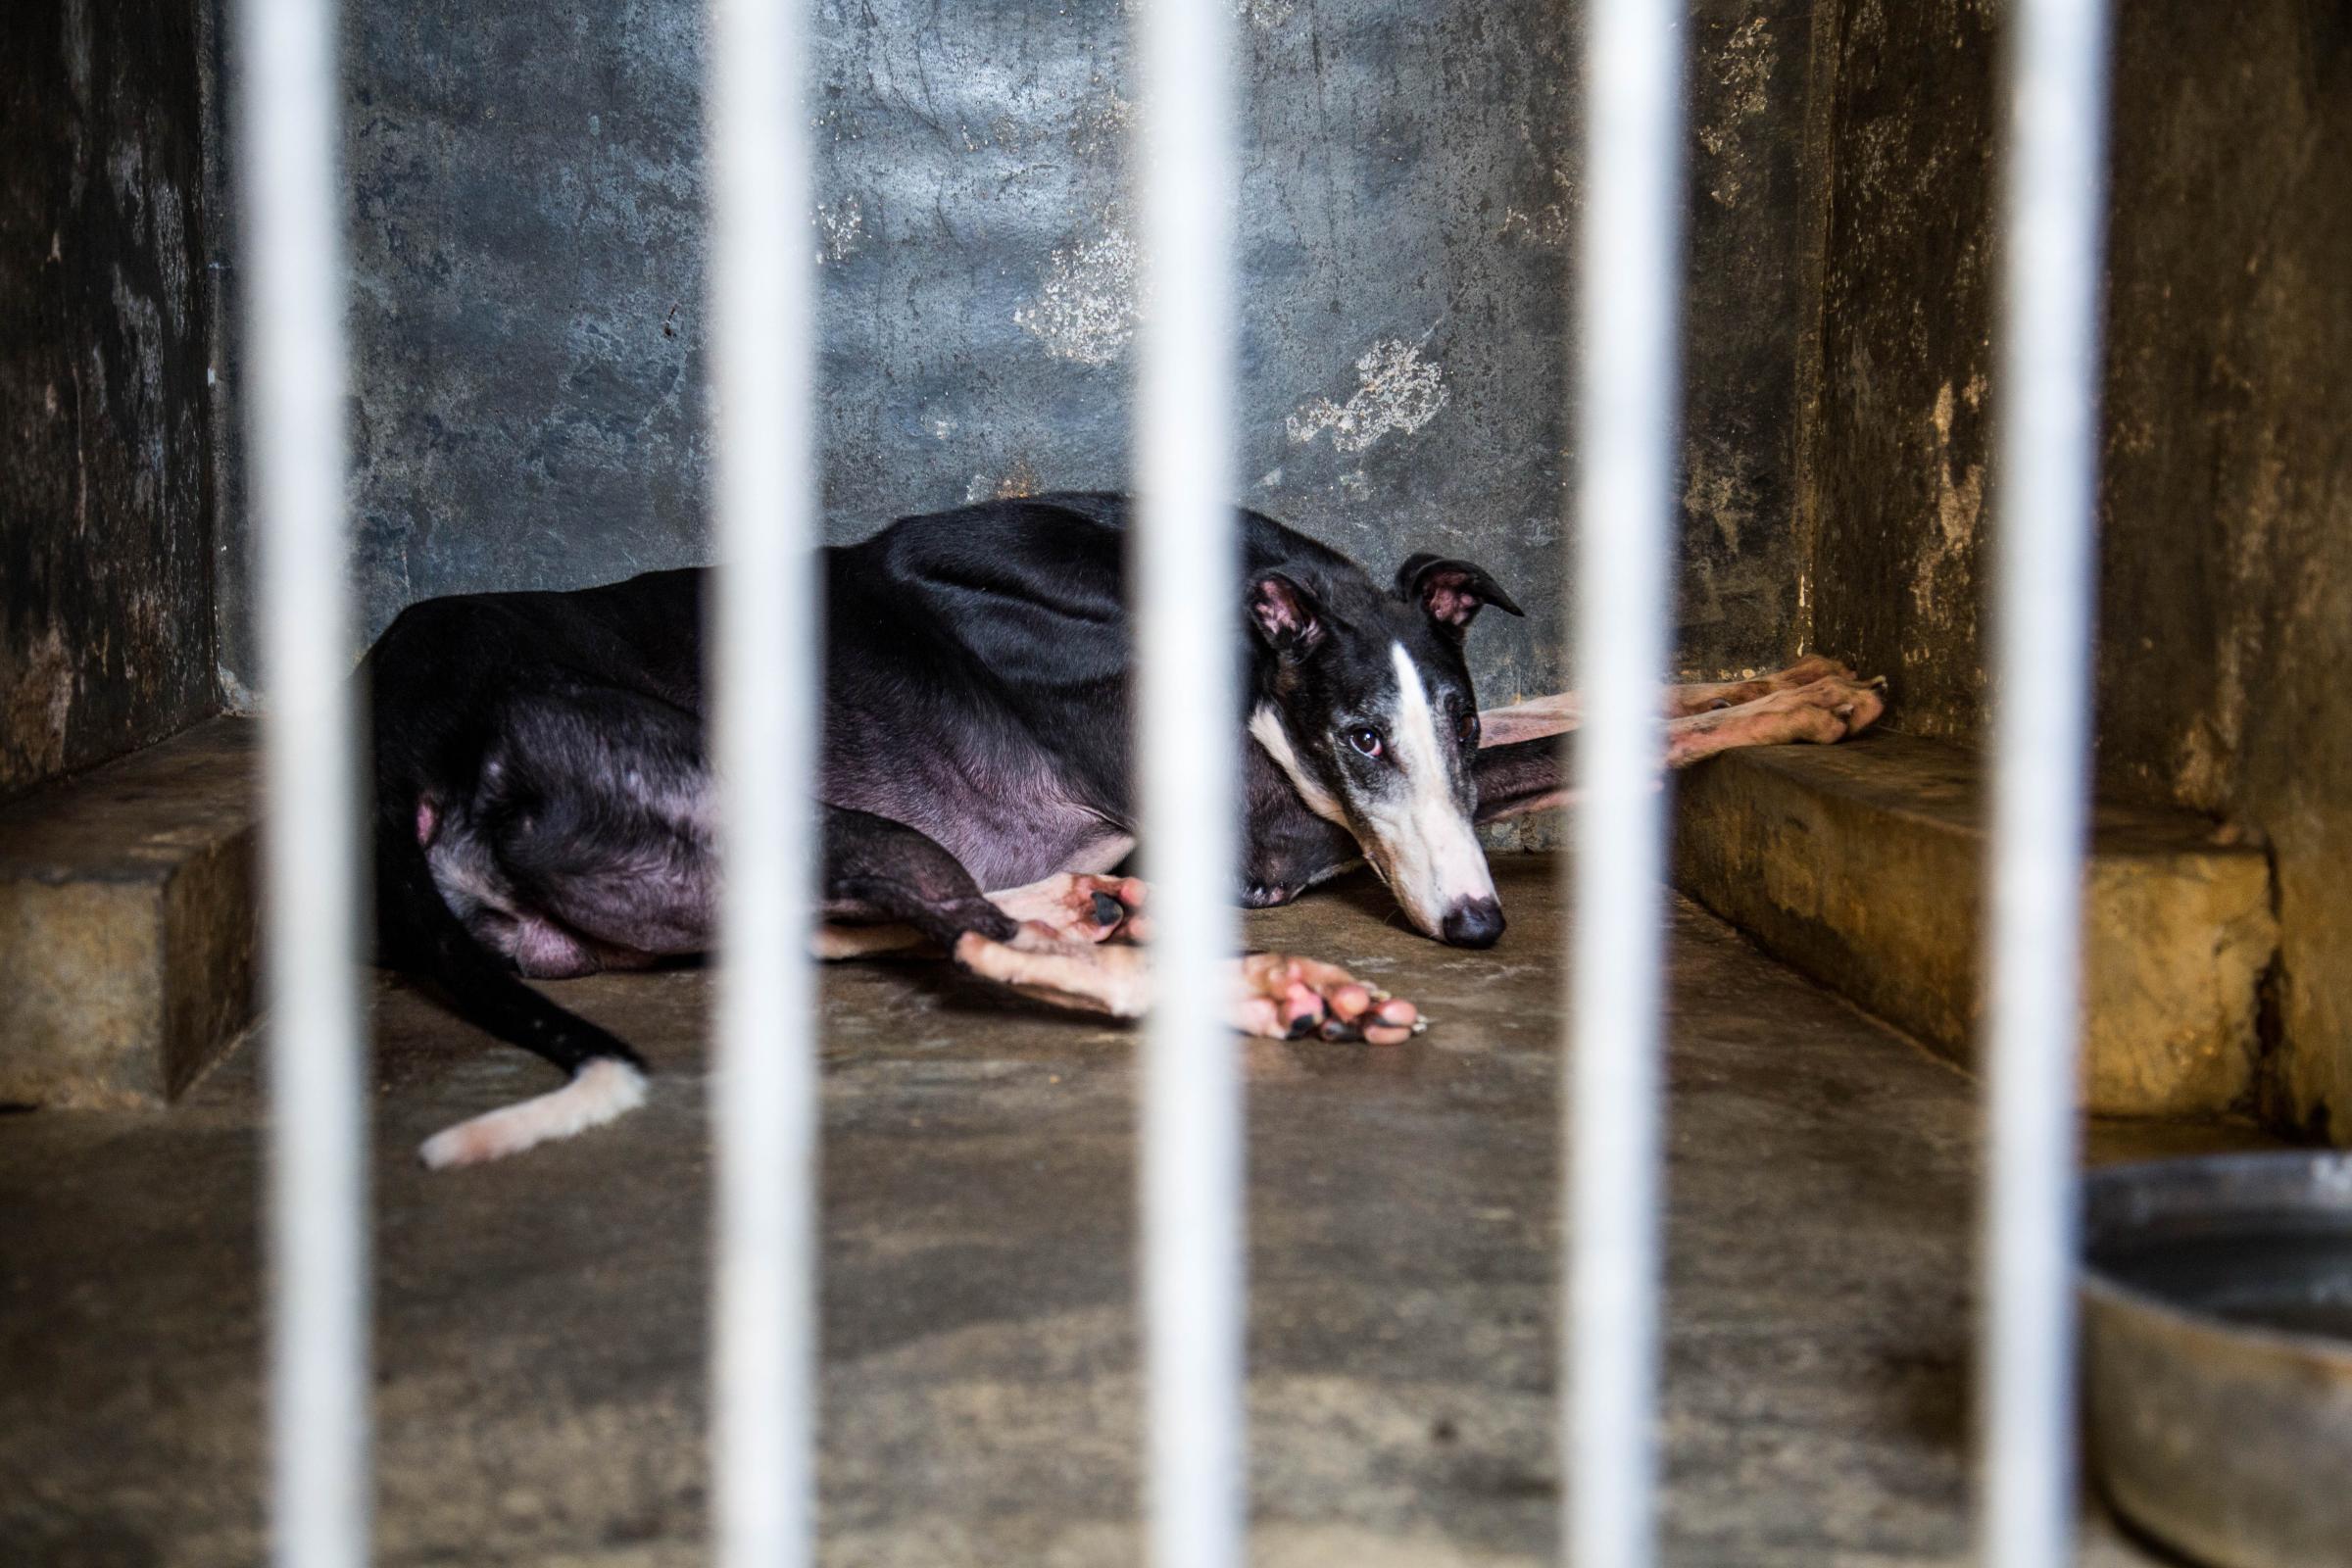 A greyhound kept in Canidrome's kennels.Photo by Aria Hangyu Chen in Macau for TIME.